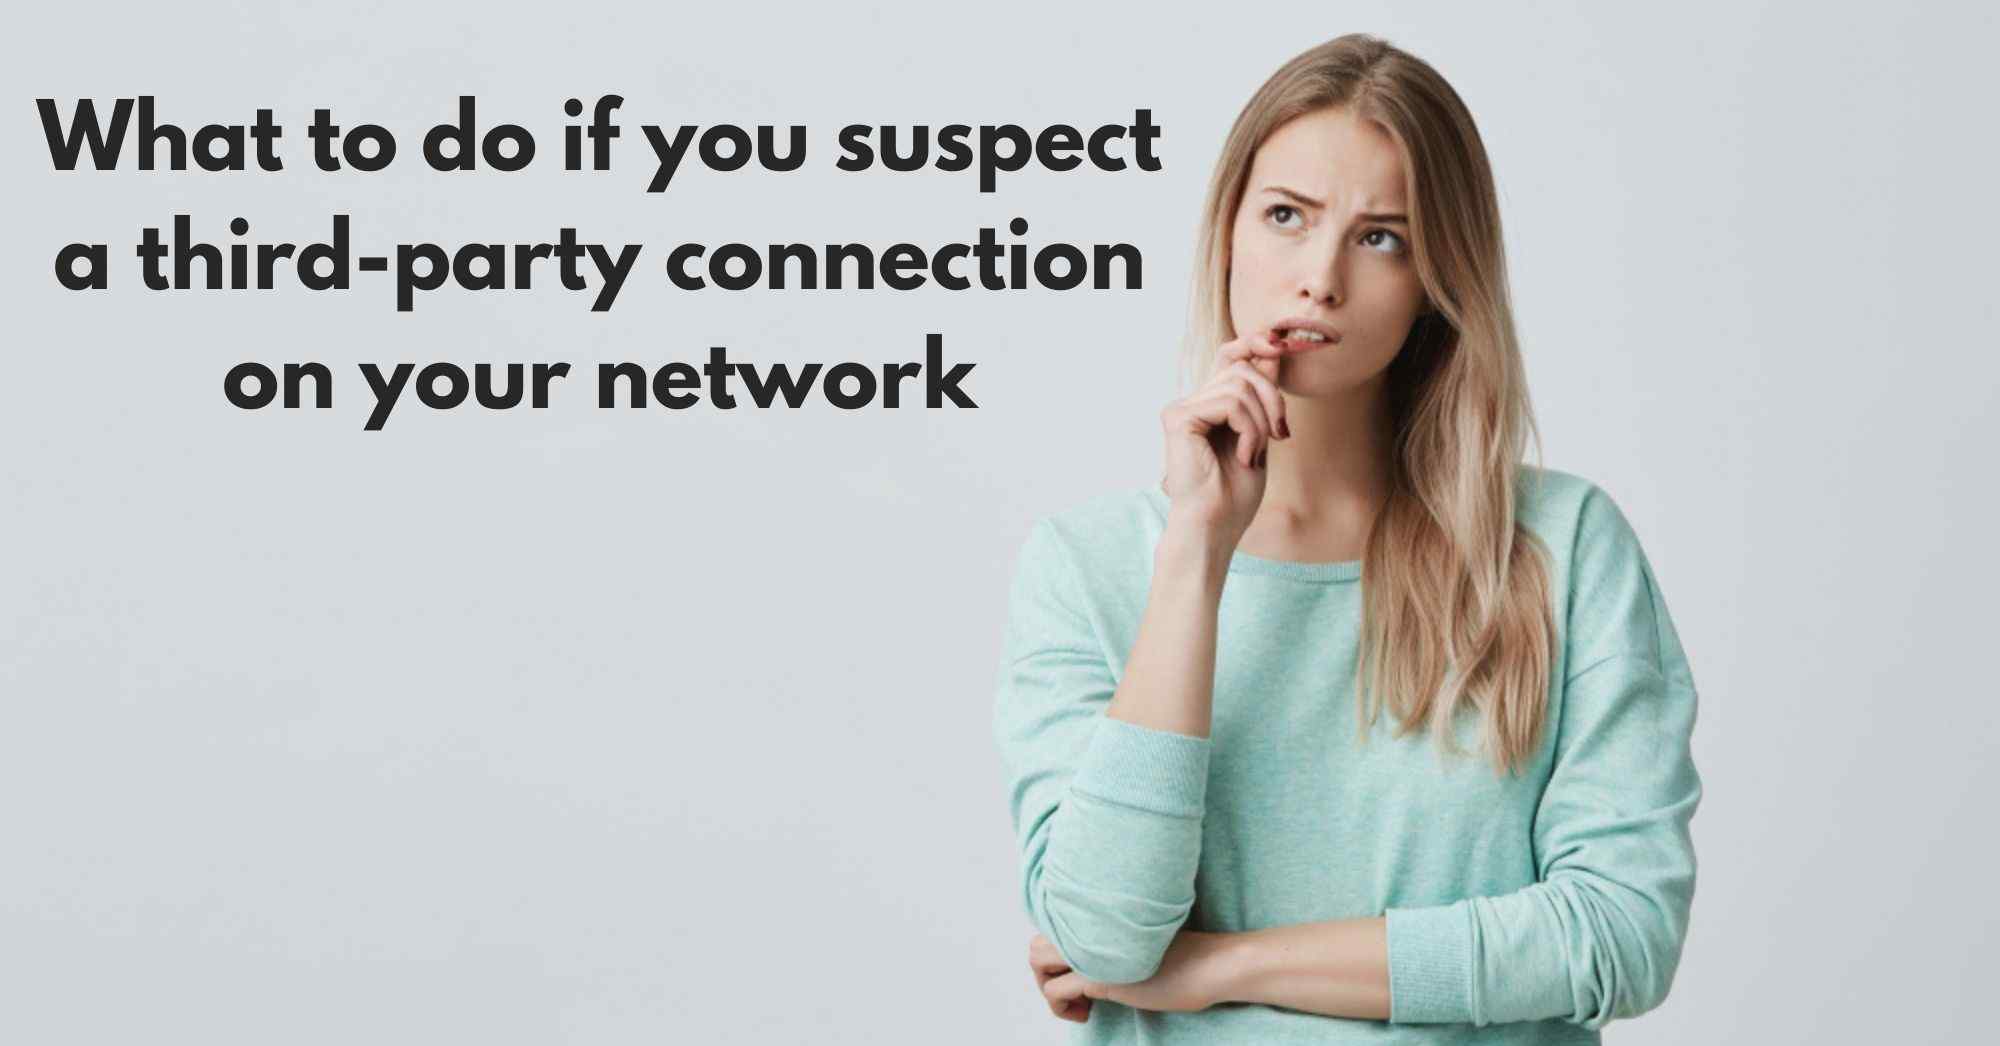 What to do if you suspect a third-party connection on your network